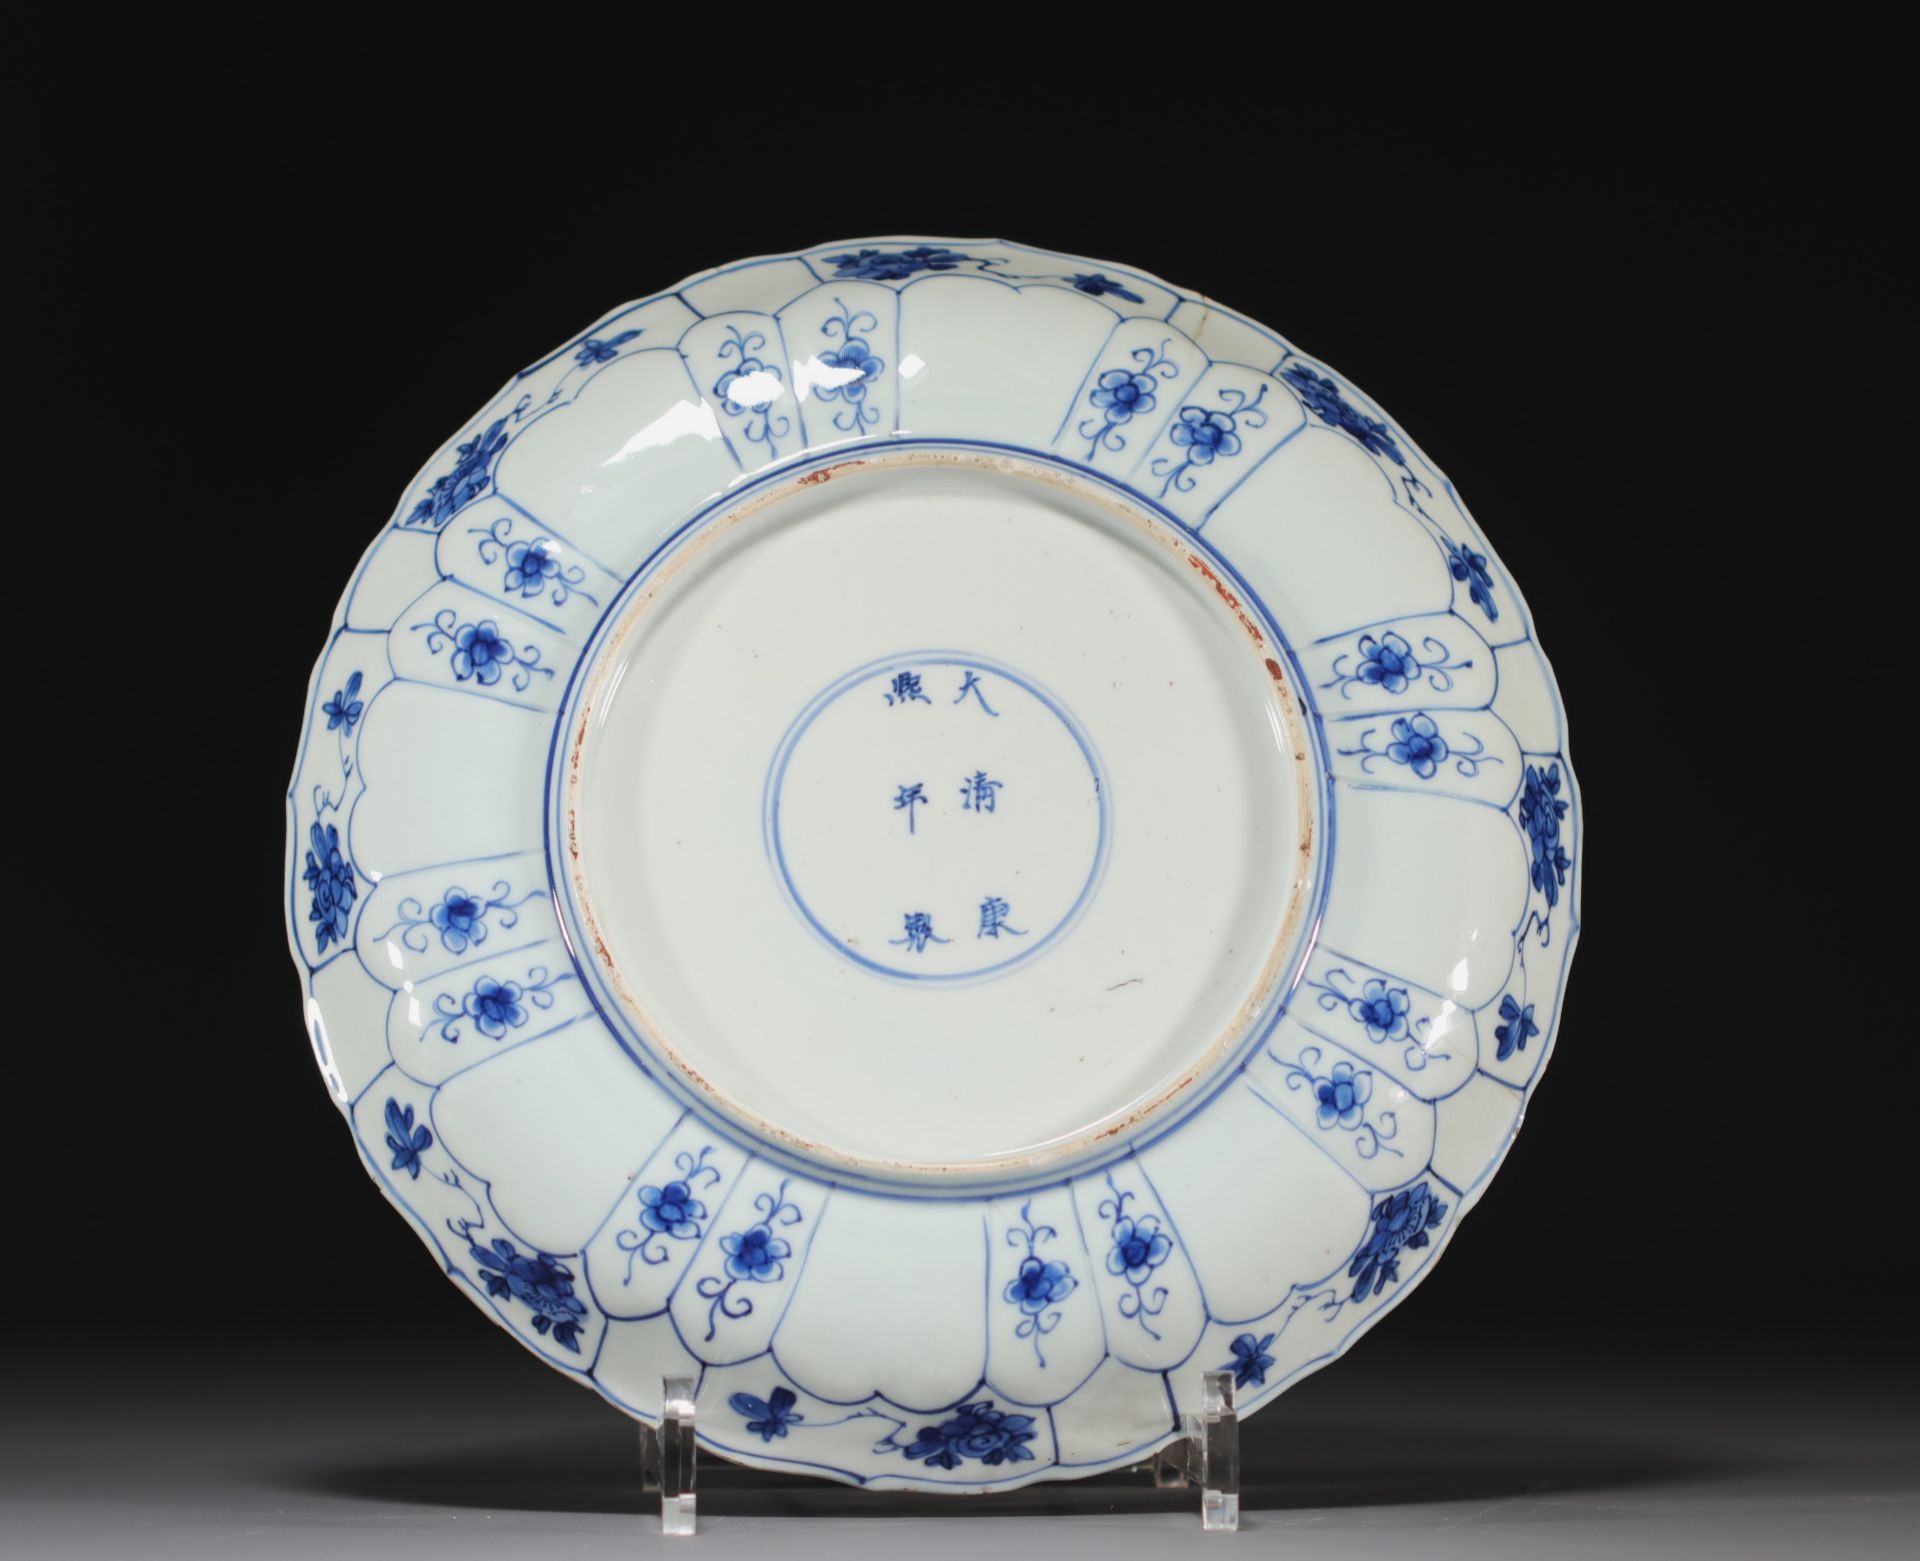 China - White-blue porcelain plate, floral design, Kangxi period and brand. - Image 2 of 2